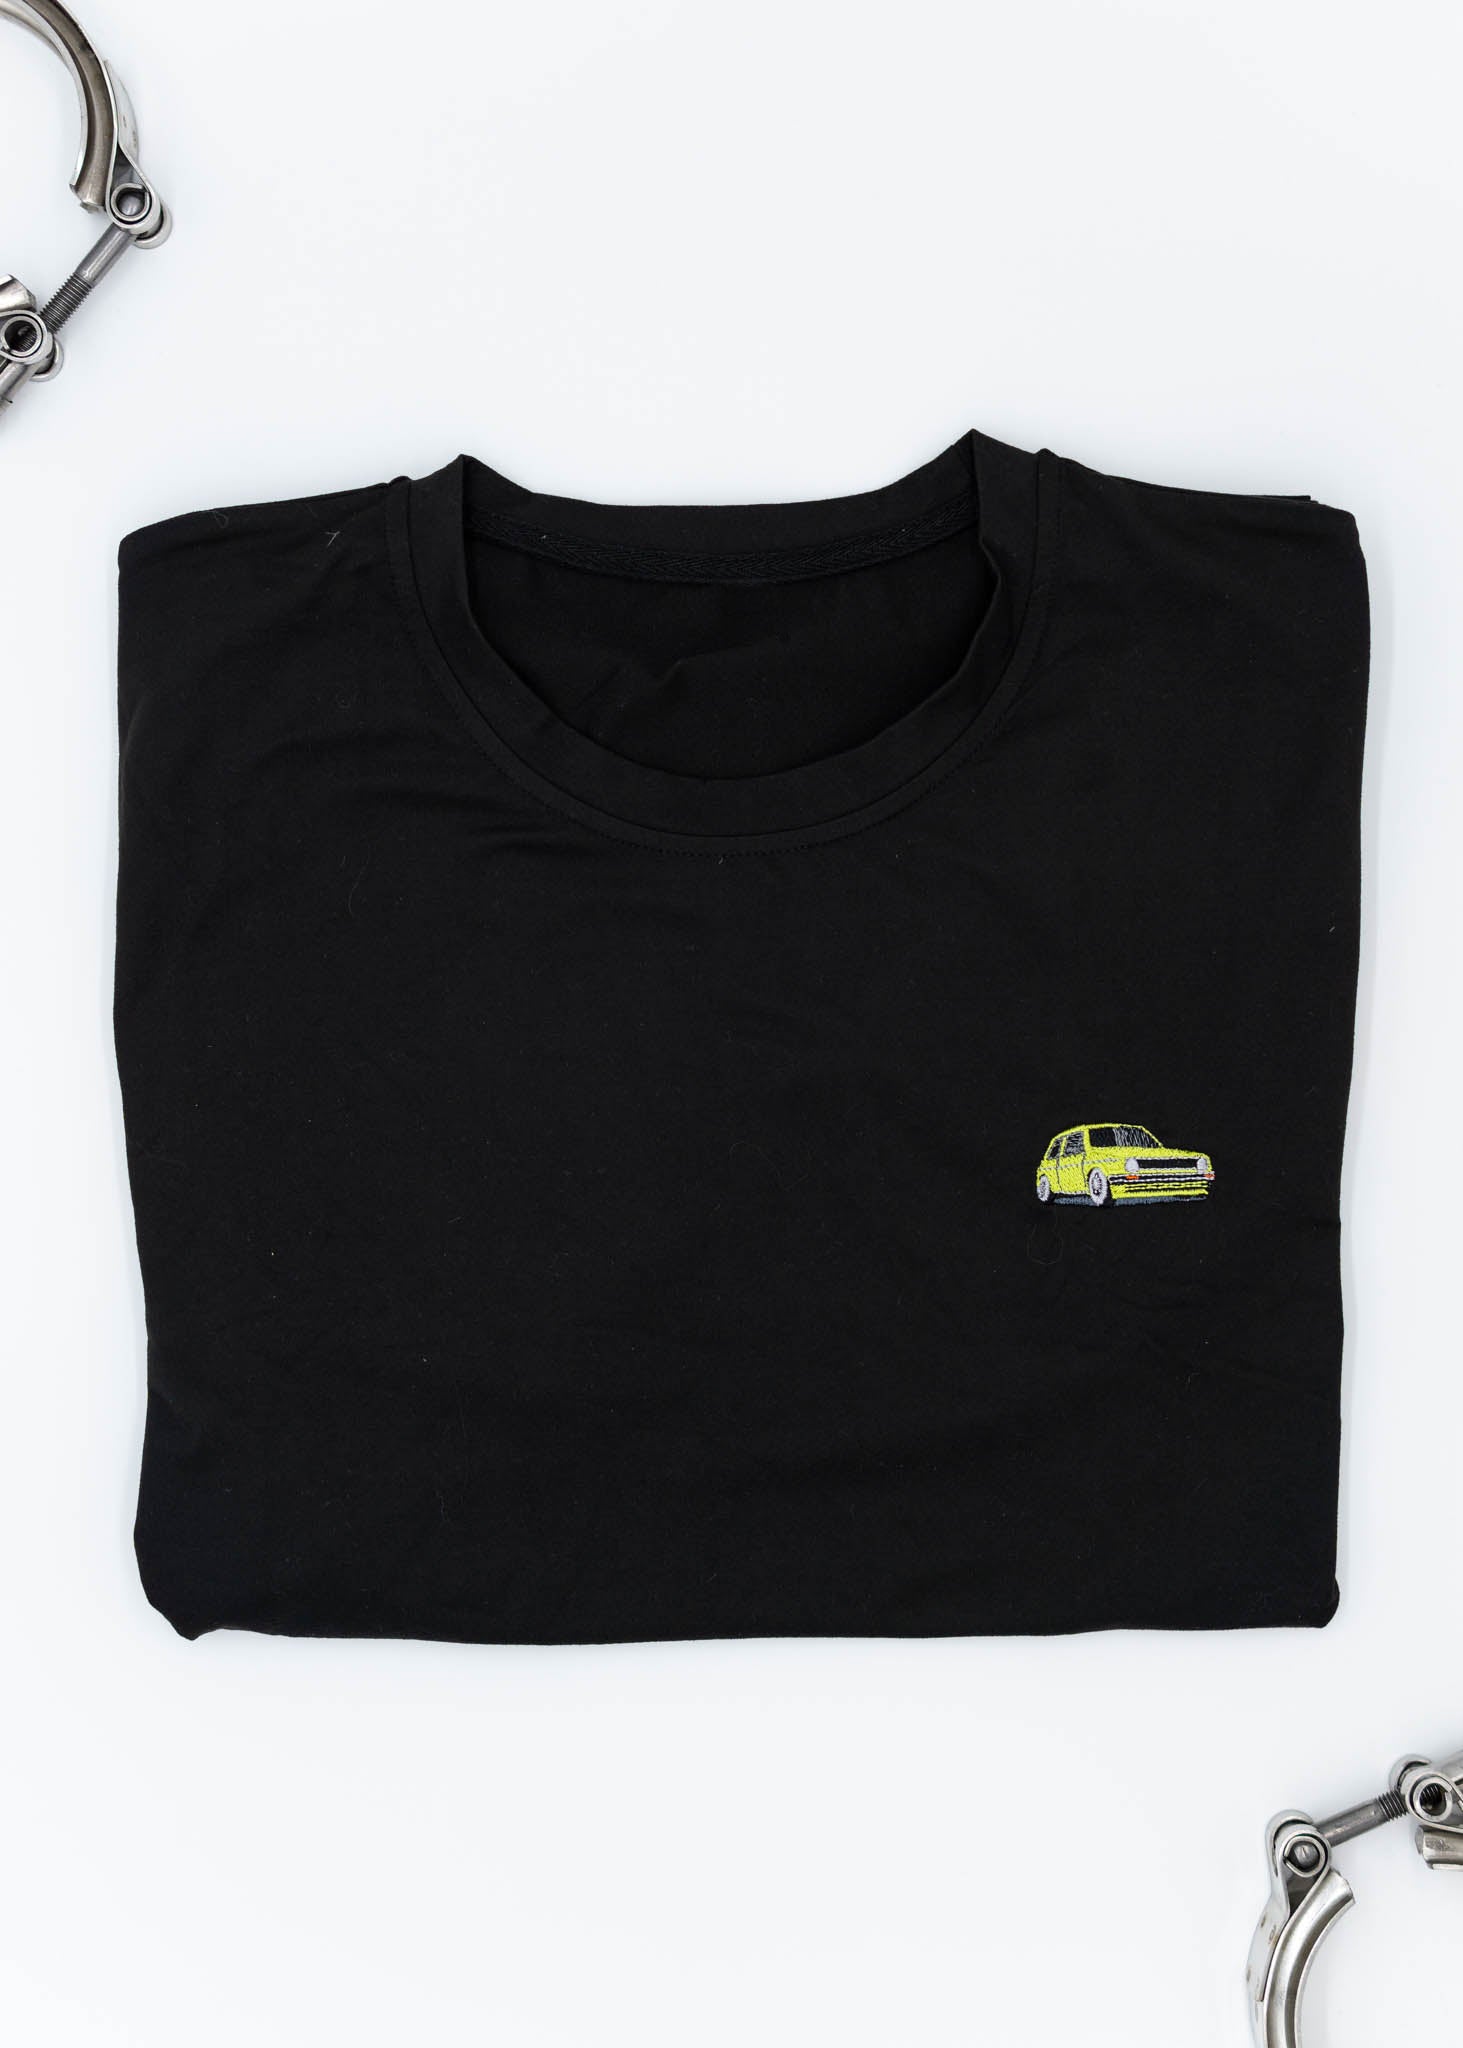 A black VW VolkswagenT-Shirt for men. Photo is a front view of the shirt with an embroidered modified green Mk1 Golf. Fabric composition is 100% polyester. The material is very stretchy, soft, comfortable, breathable, and non-transparent. The style of this shirt is short sleeve, with a crewneck neckline.